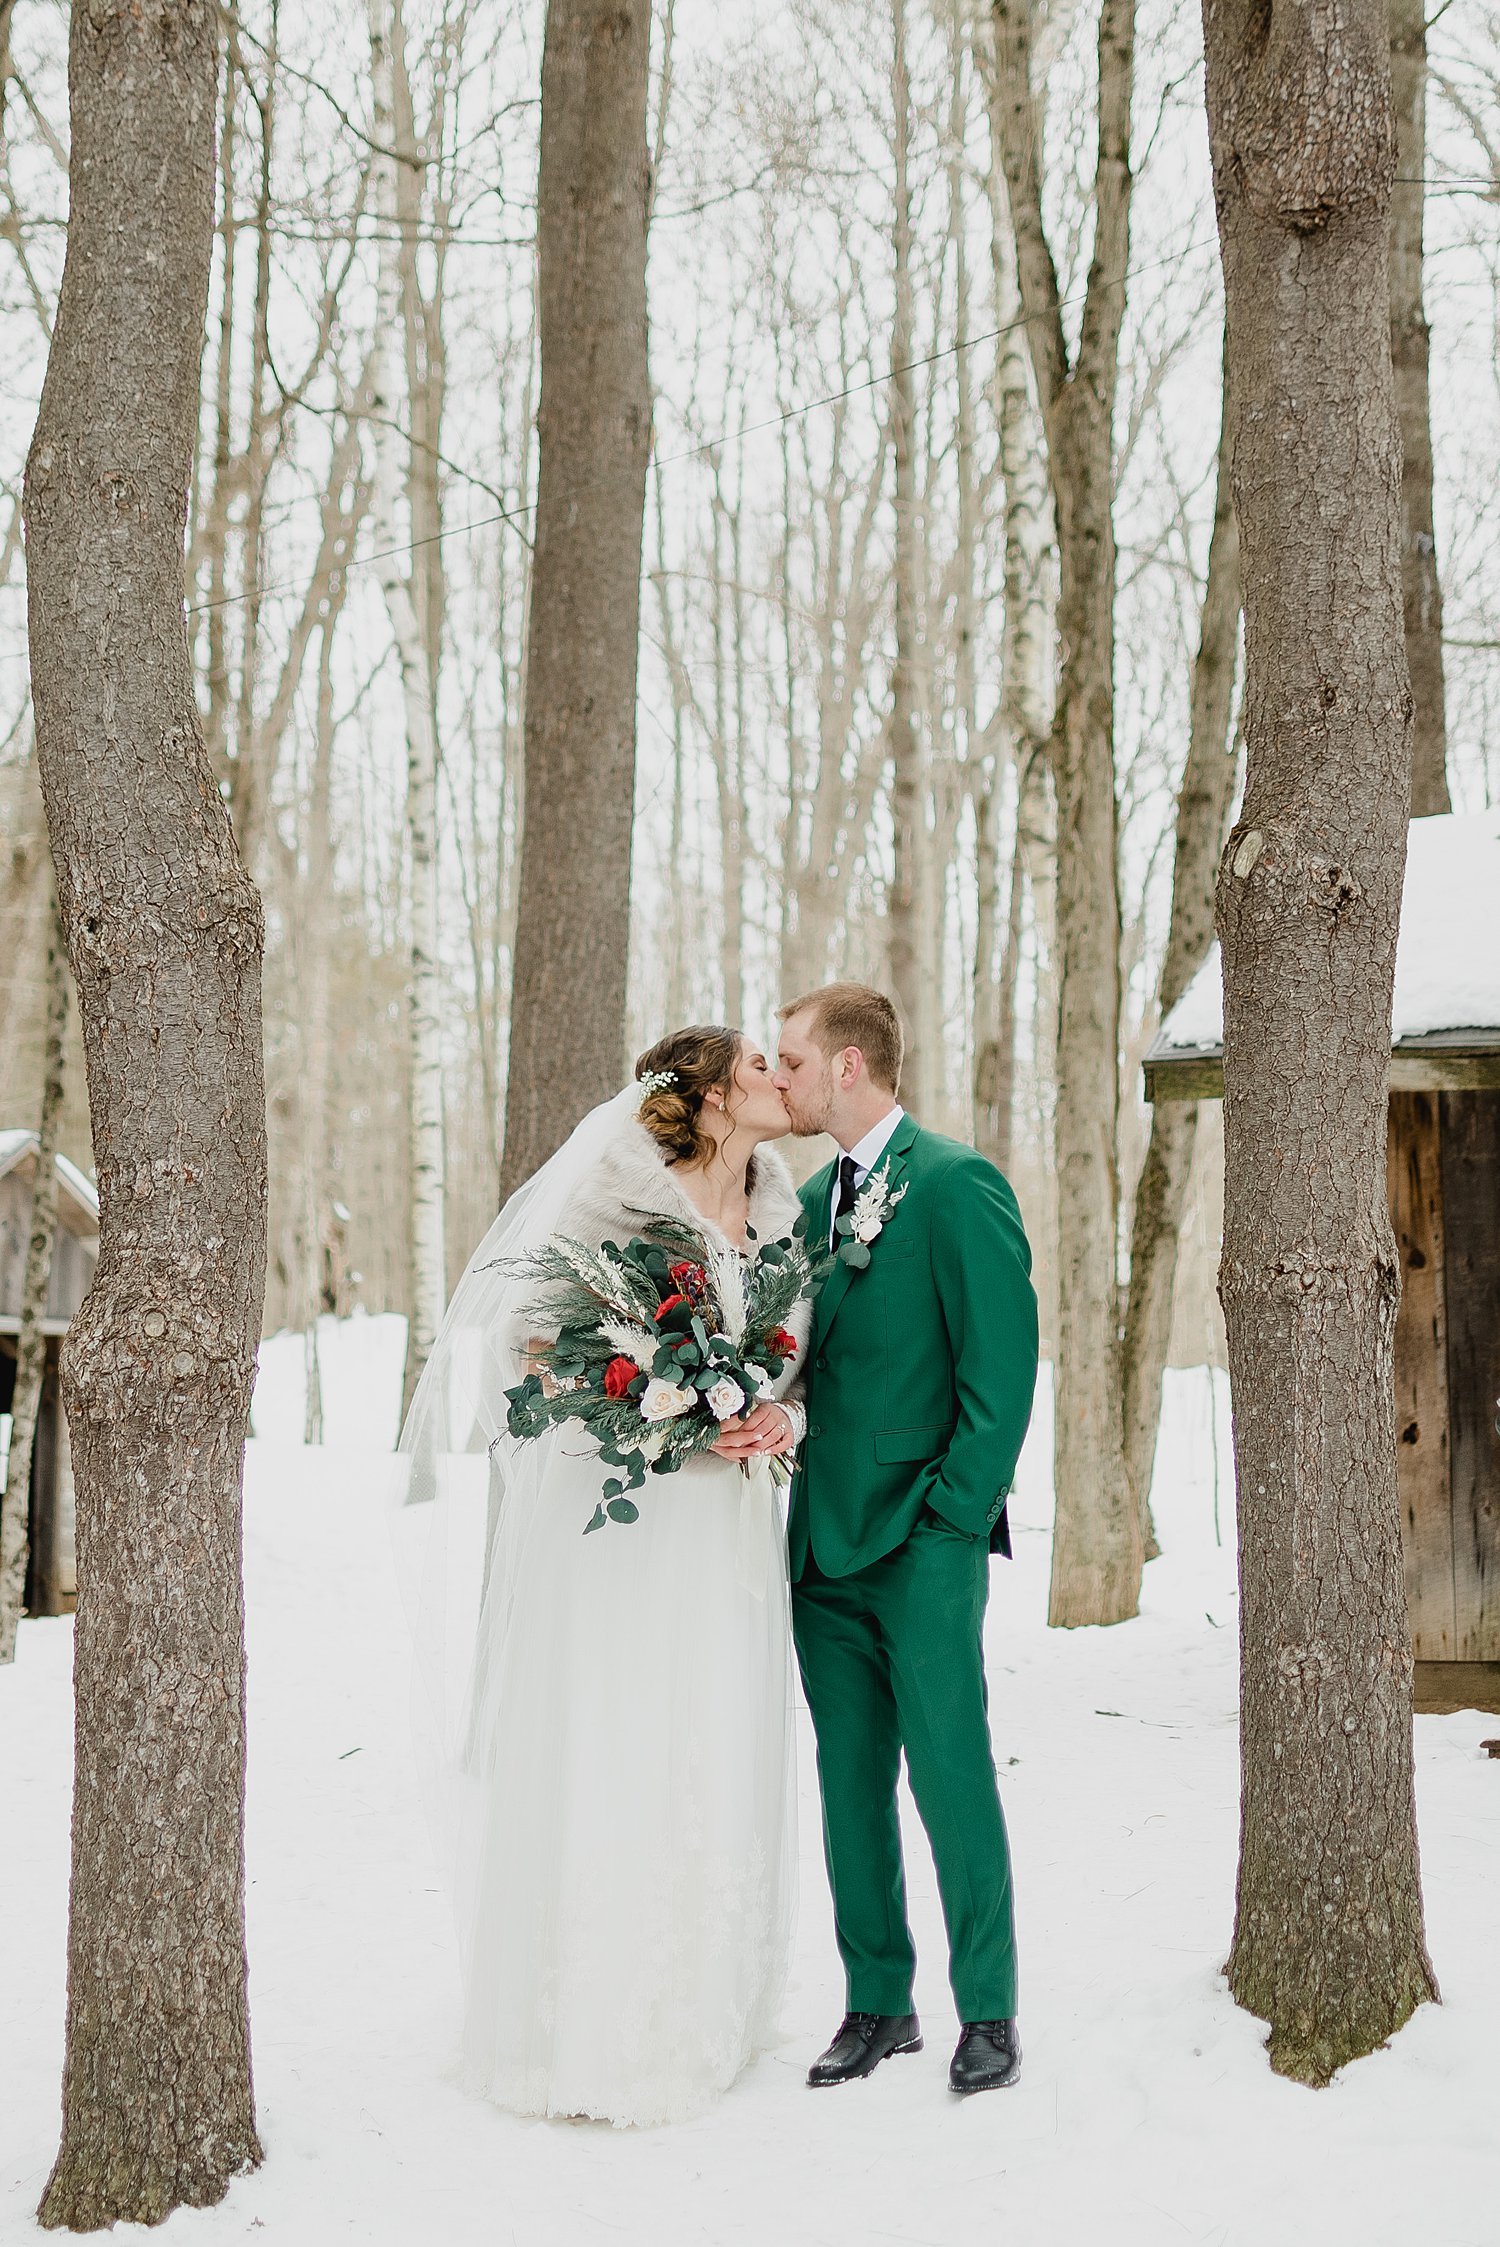 Intimate Winter Elopement at O'Hara Mill Homestead in Madoc, Ontario | Prince Edward County Wedding Photographer | Holly McMurter Photographs_0022.jpg